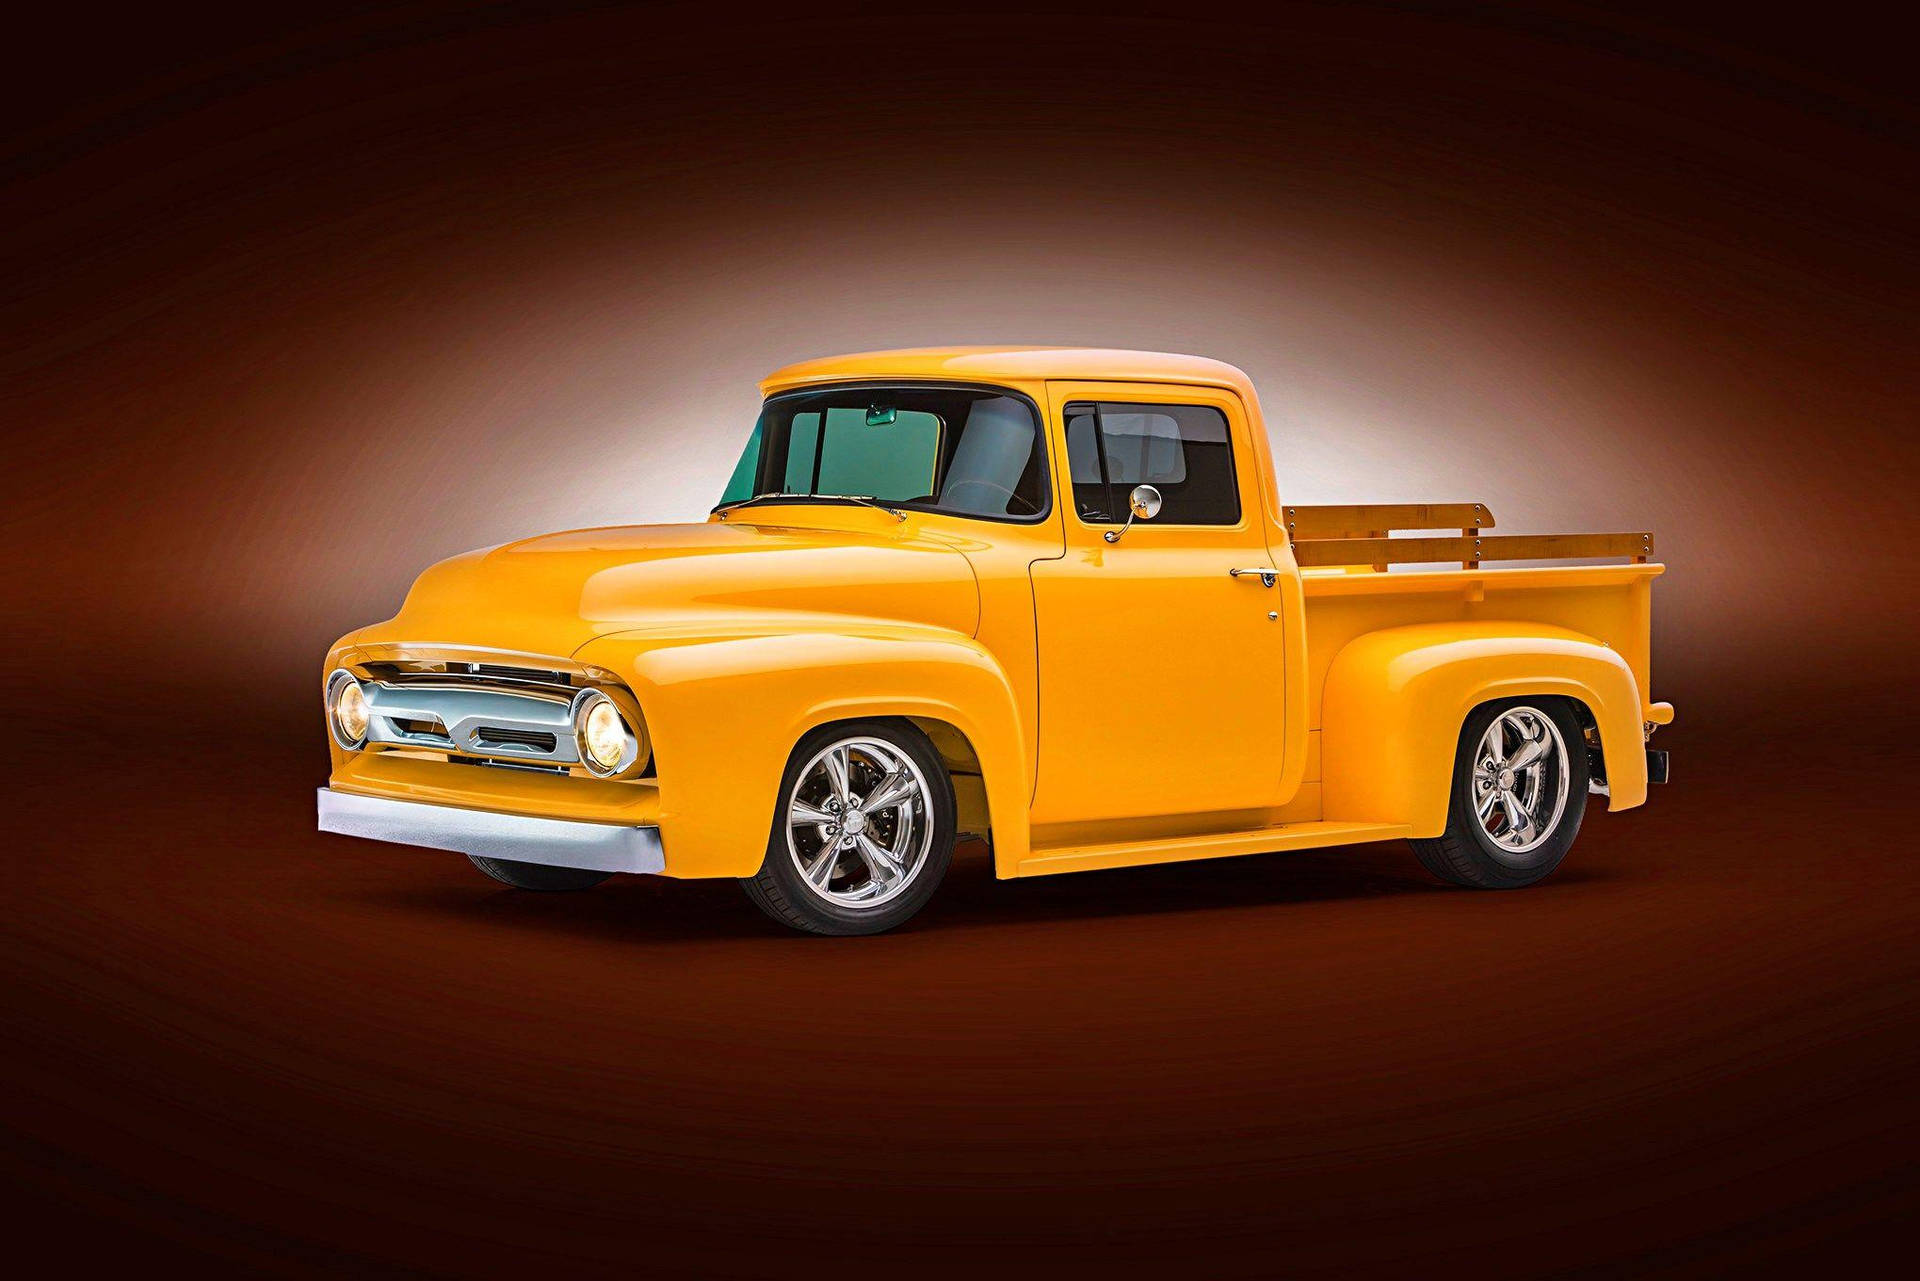 44 Old Ford Truck Wallpapers